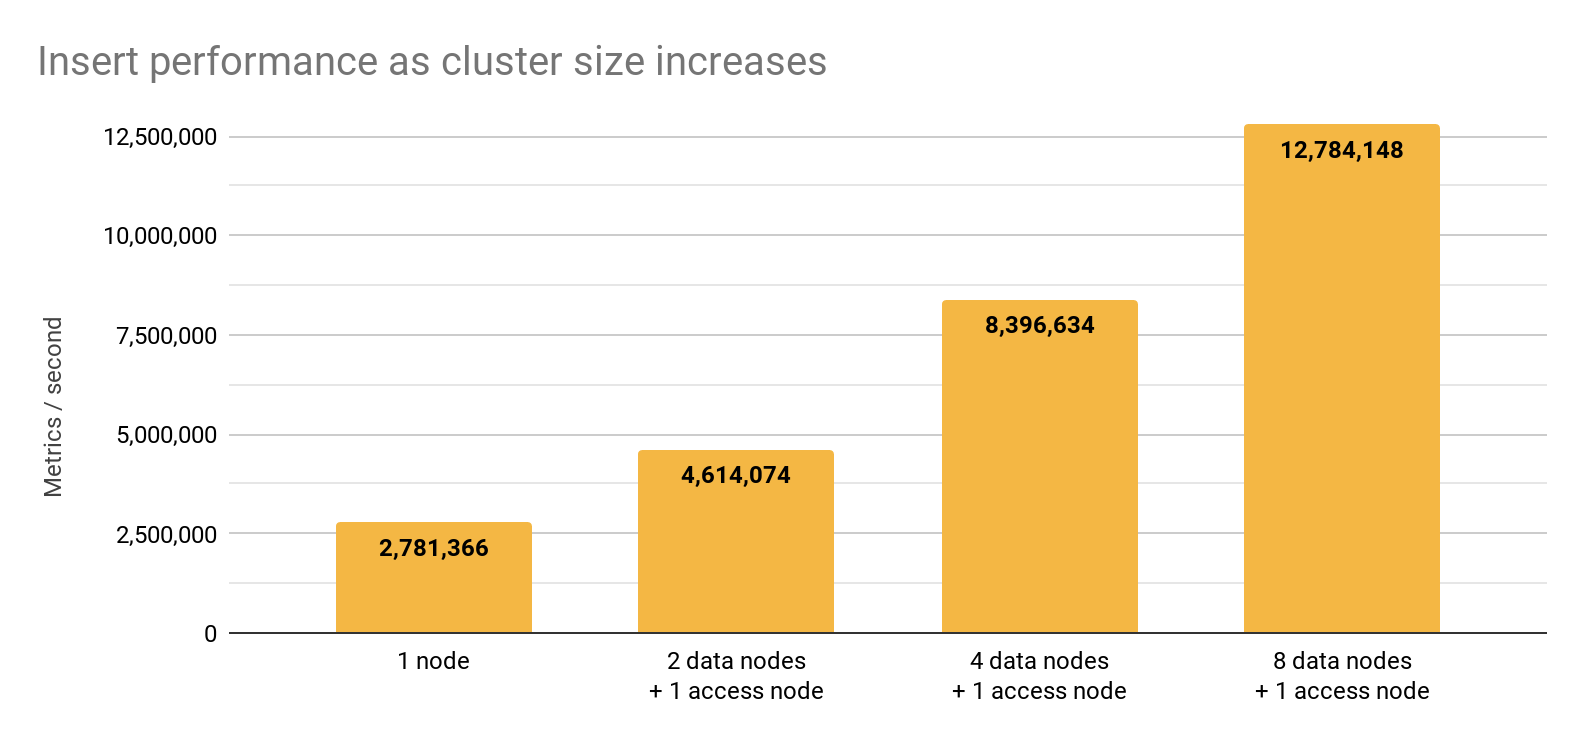 Insert performance of distributed TimescaleDB as cluster size increases